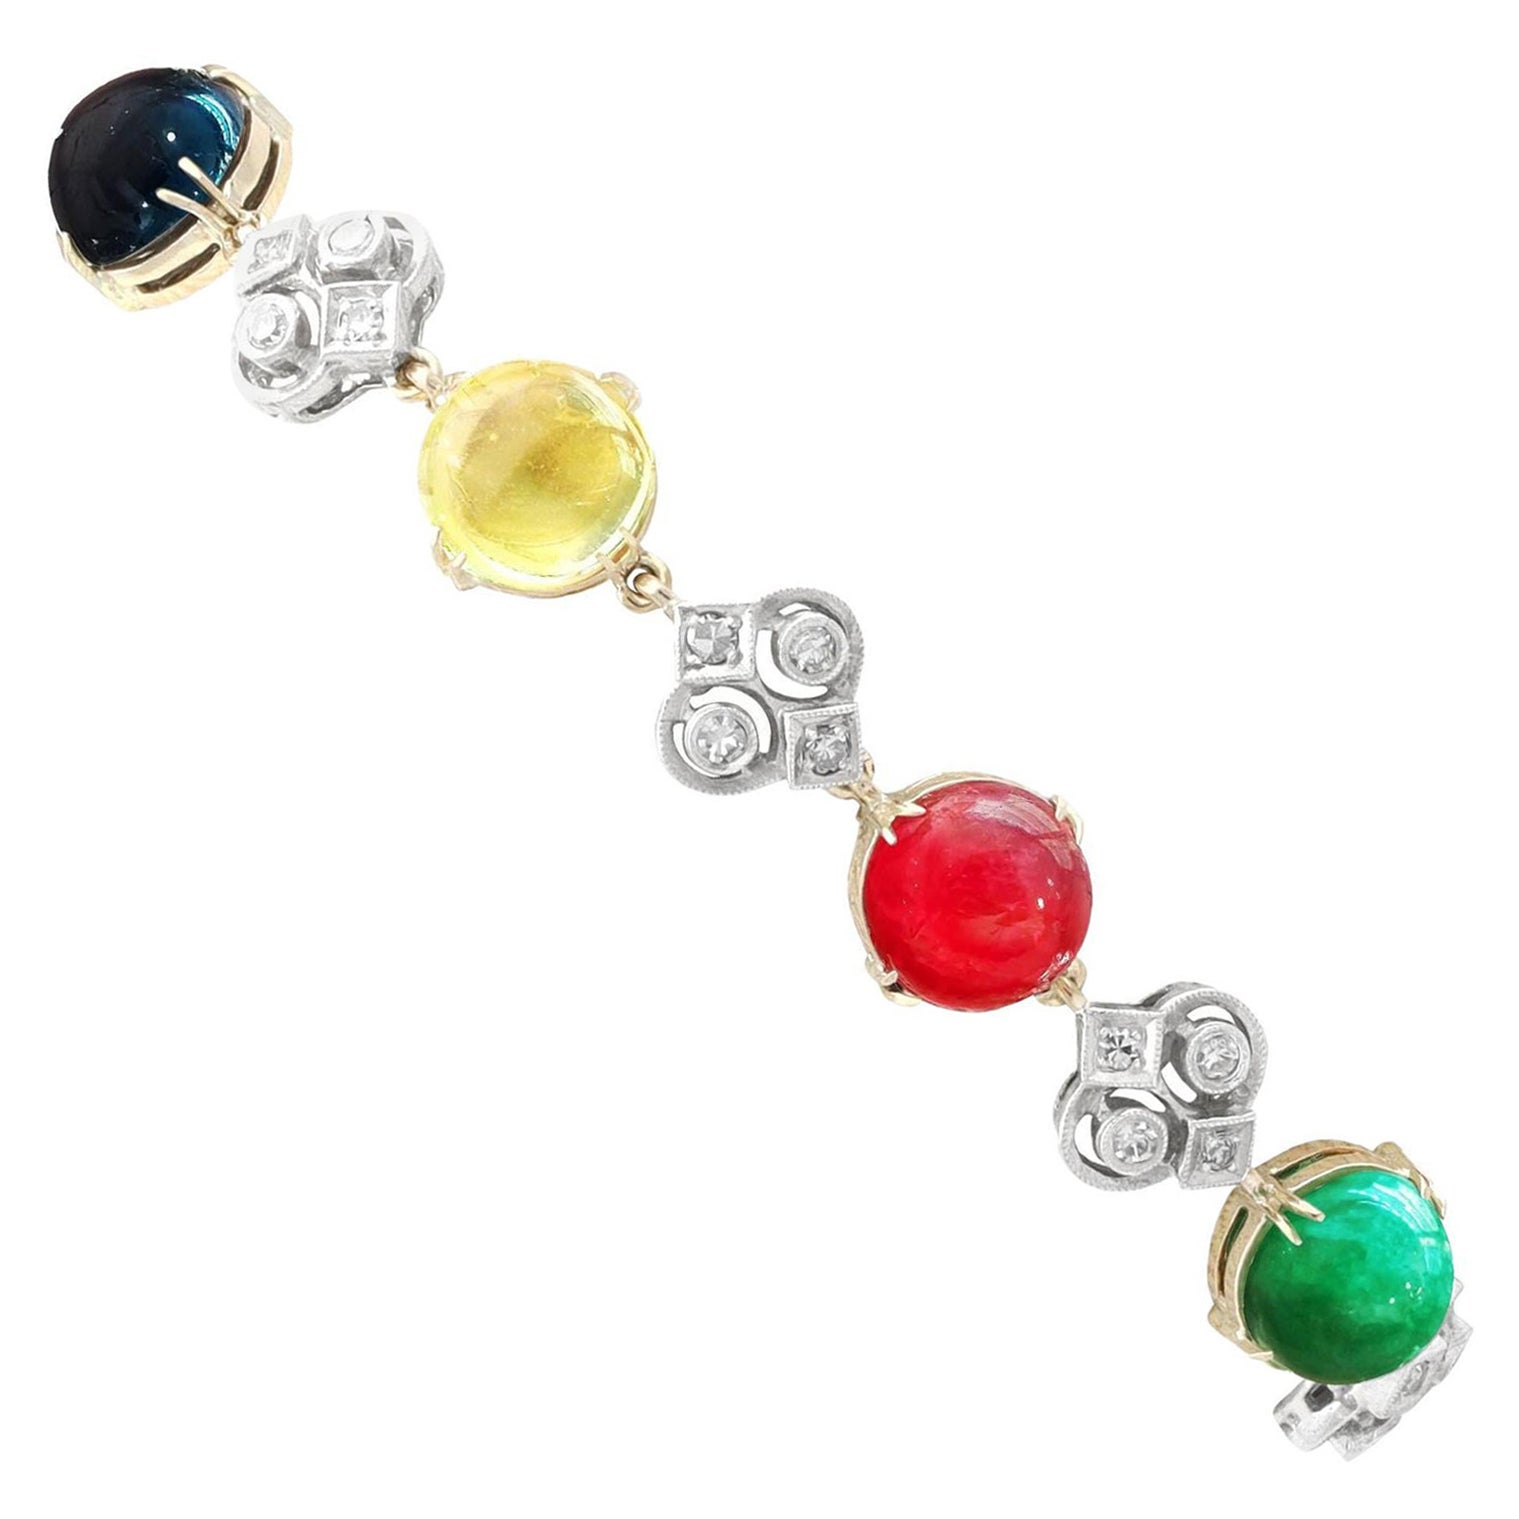 Antique Gemstone and Yellow Gold Bracelet and Pendant Suite